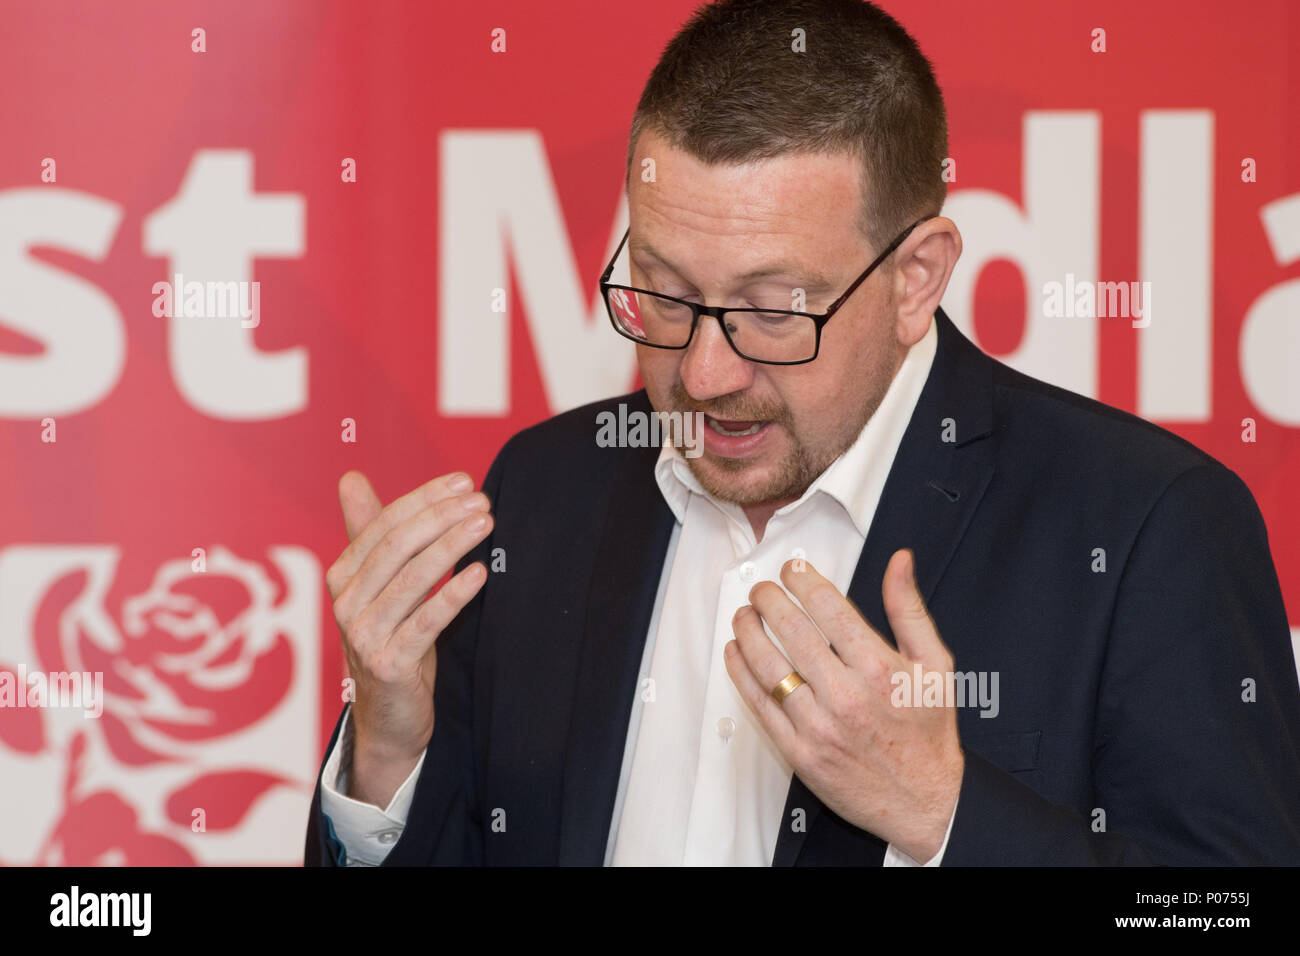 Queens Walk Community Centre, Nottingham, Nottinghamshire, England, UK. 9th.June 2018. Labour Party event. Andrew Gwynne MP, Shadow Secretary of State for Communities and Local Government, speaking at the Labour Party local government day. Alan Beastall/Alamy Live News Stock Photo